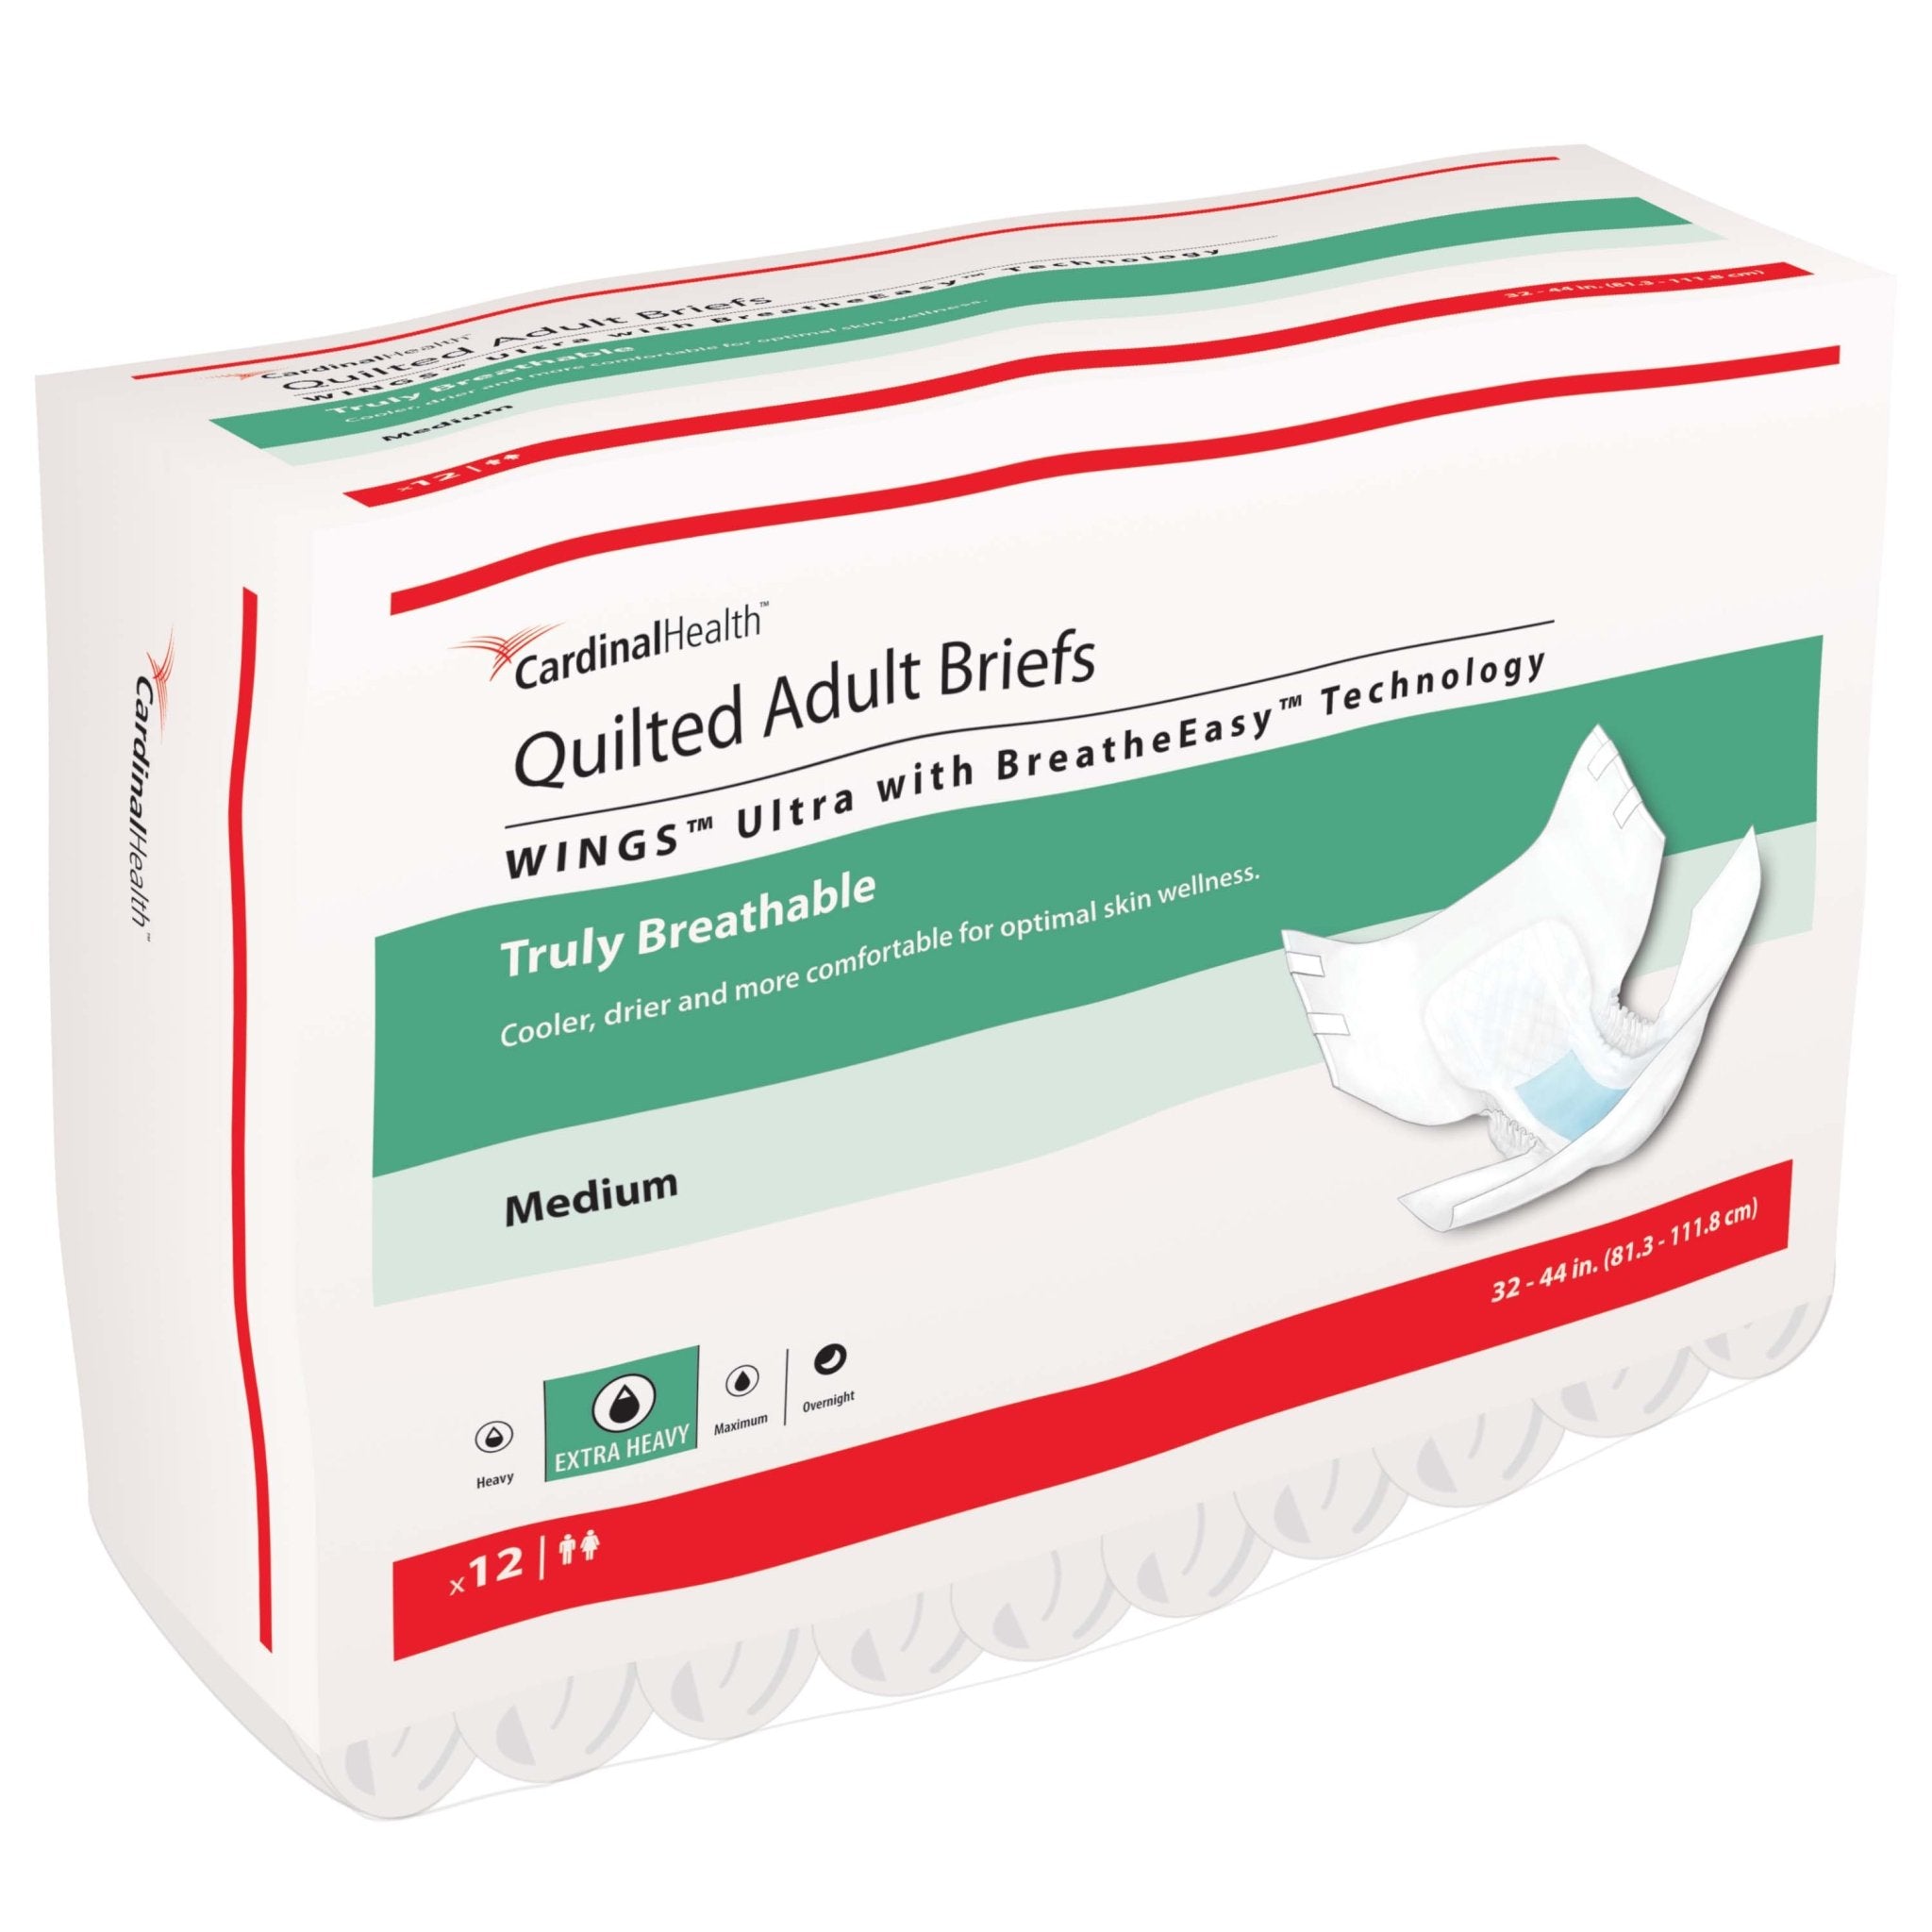 CA/96 - Cardinal Health, Quilted Adult Briefs, Wings™ Ultra, Medium, 32" - 44" - Best Buy Medical Supplies